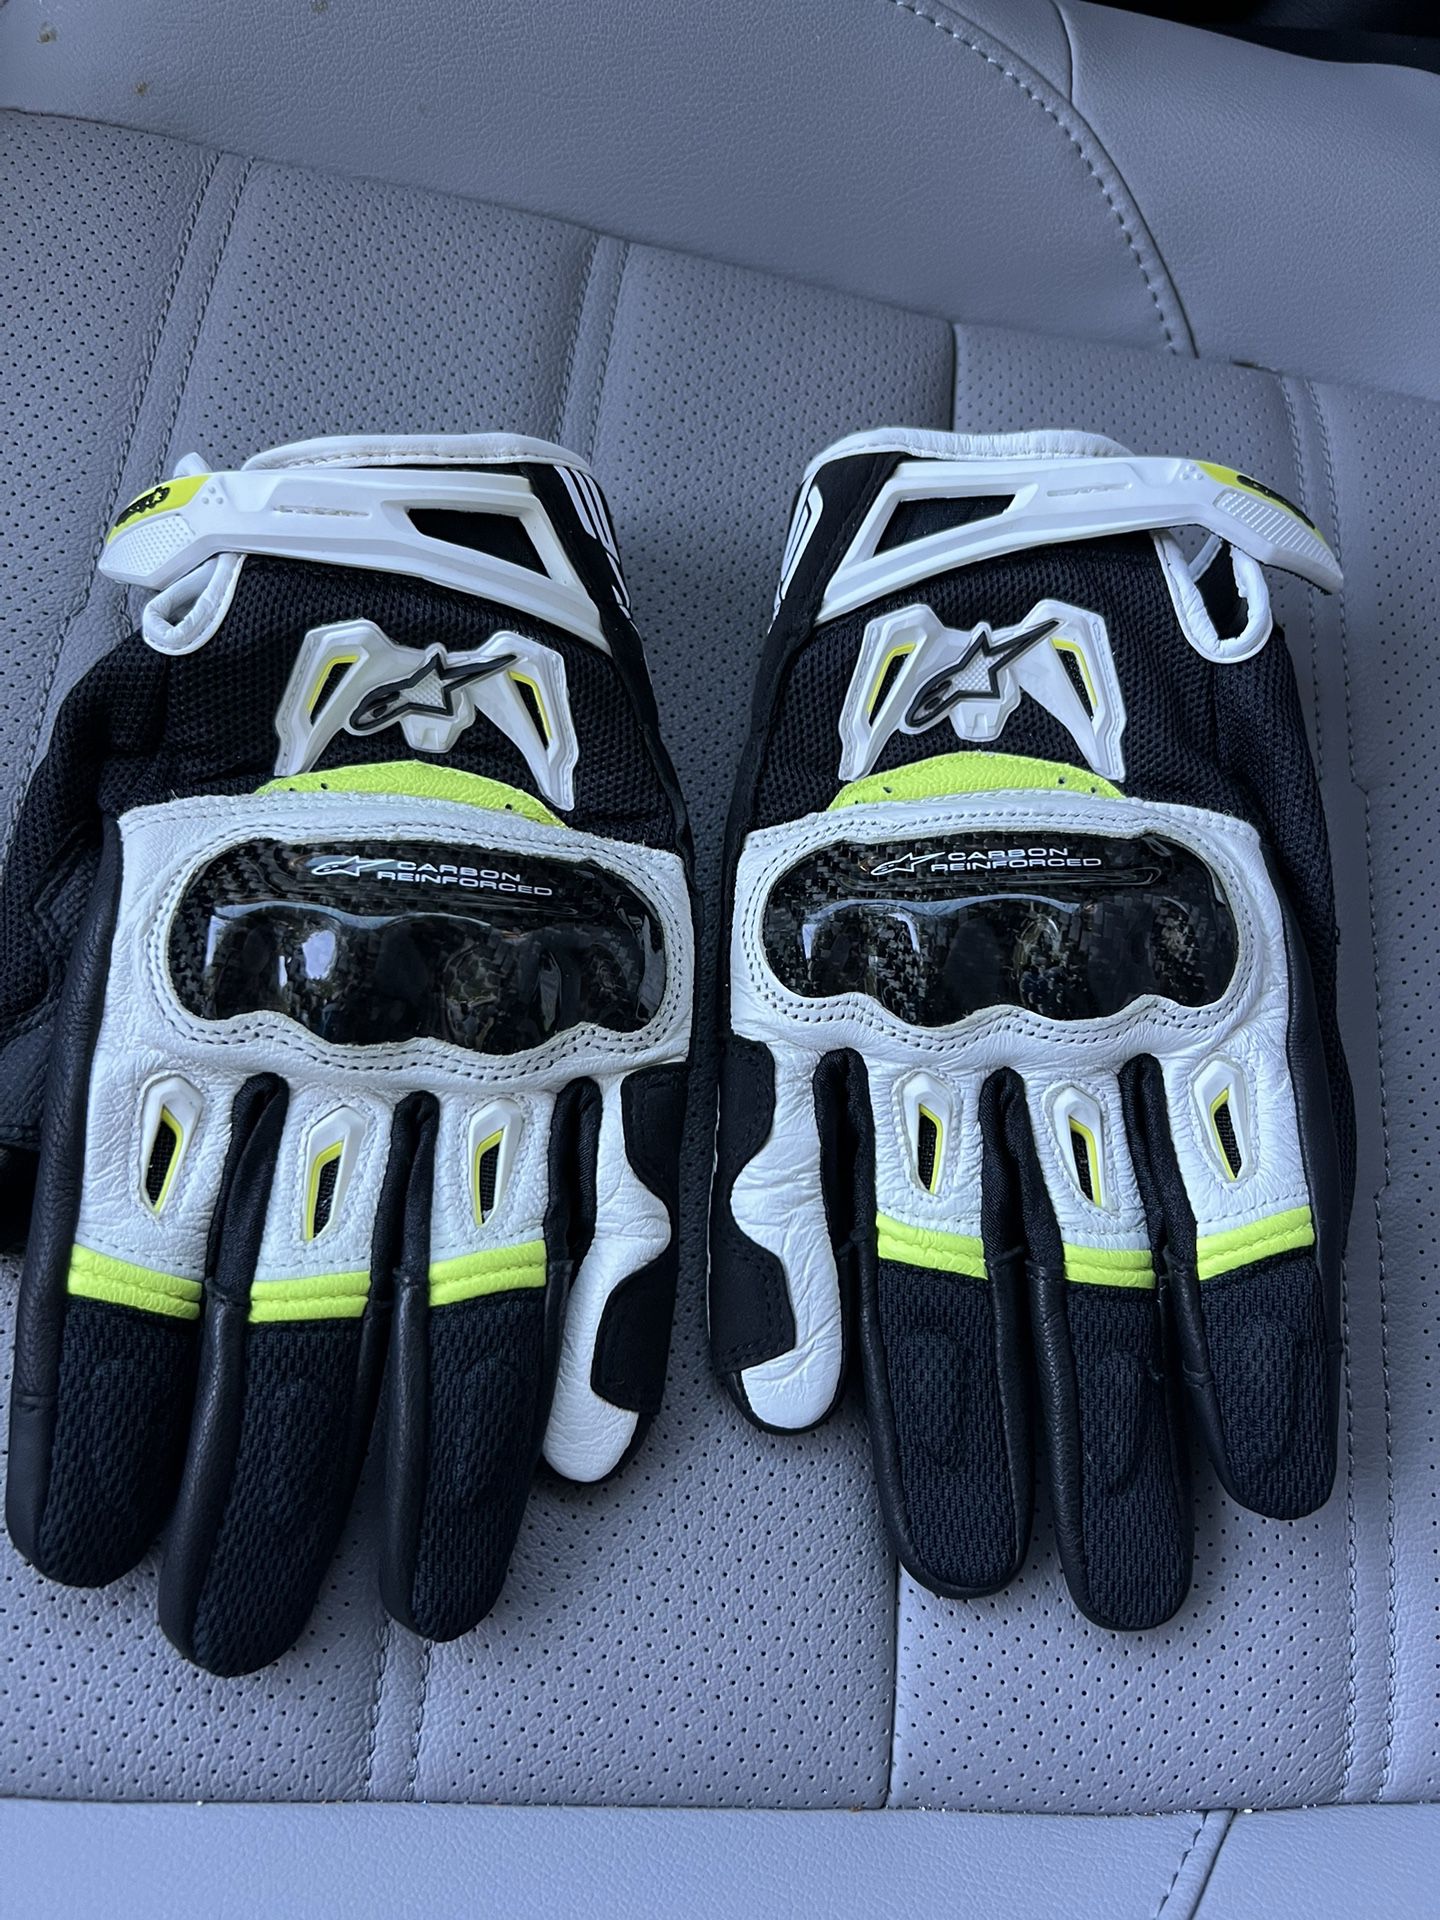 Large Motorcycle Gloves